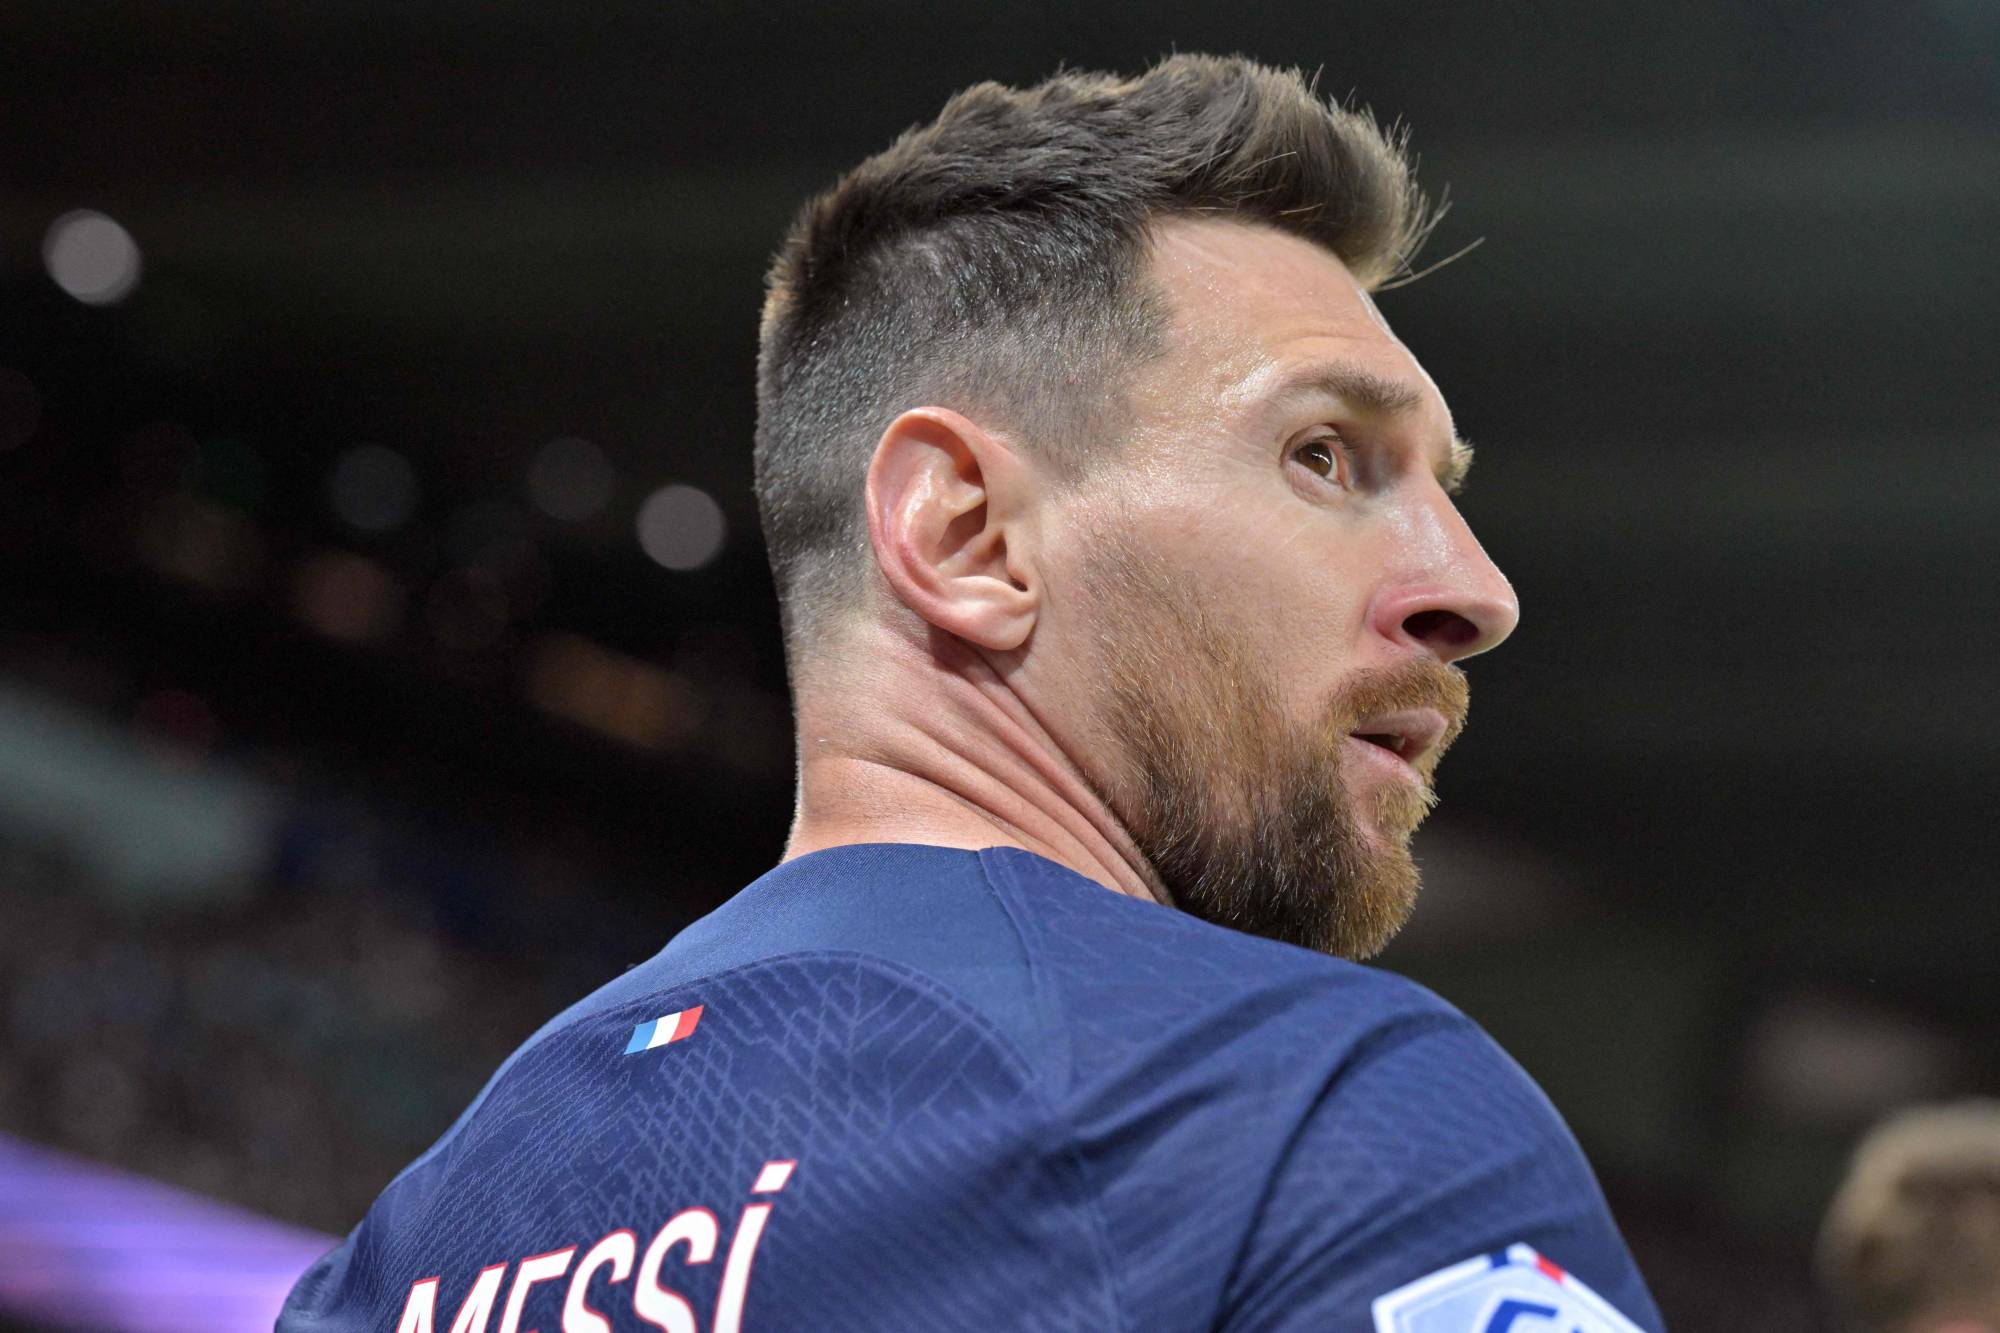 L'Equipe: Messi and Paris Saint-Germain are one step away from